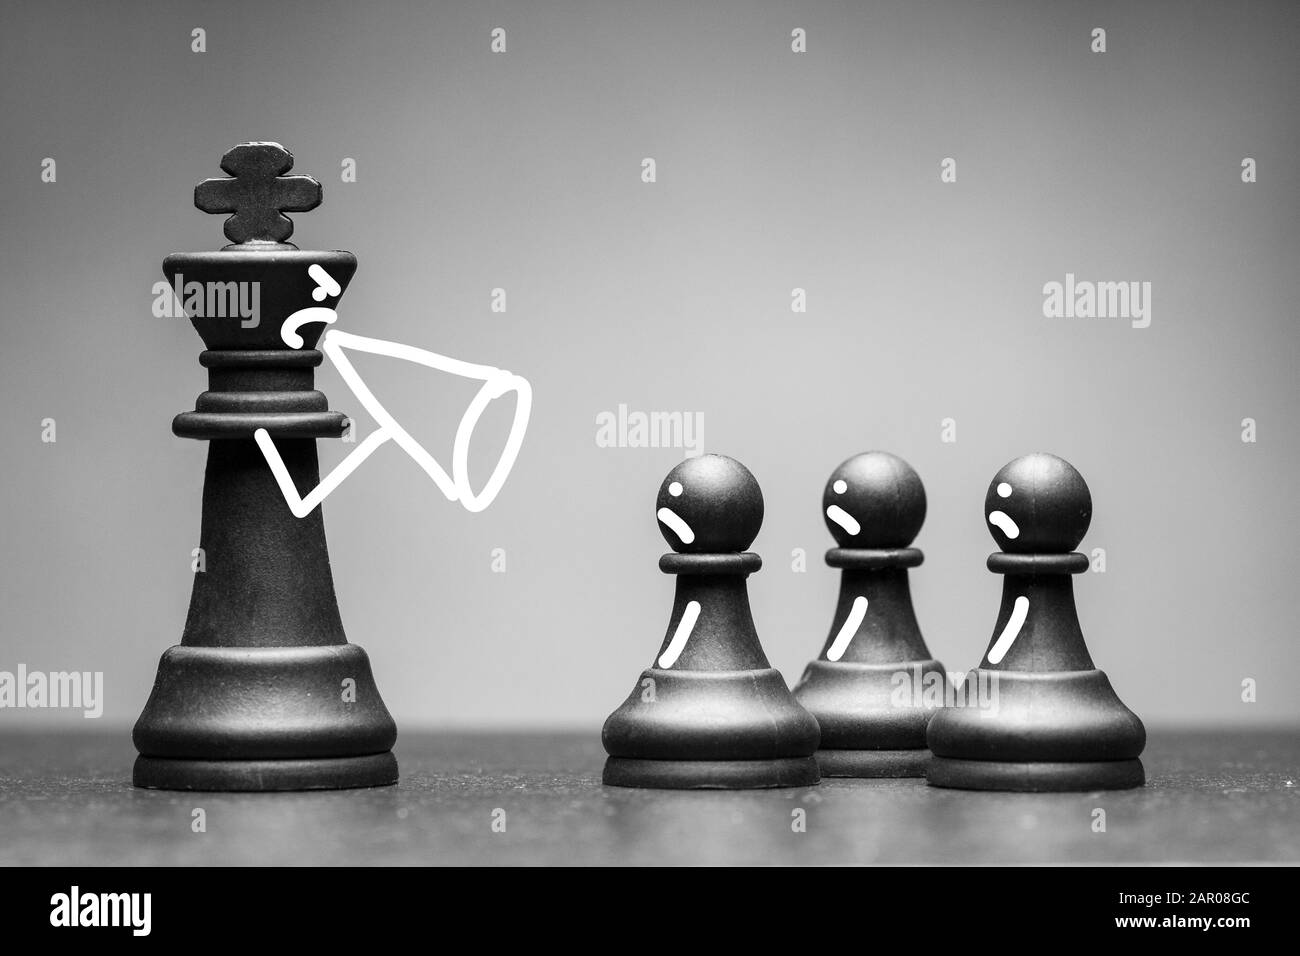 Black King chess piece yelling at his pawns Stock Photo